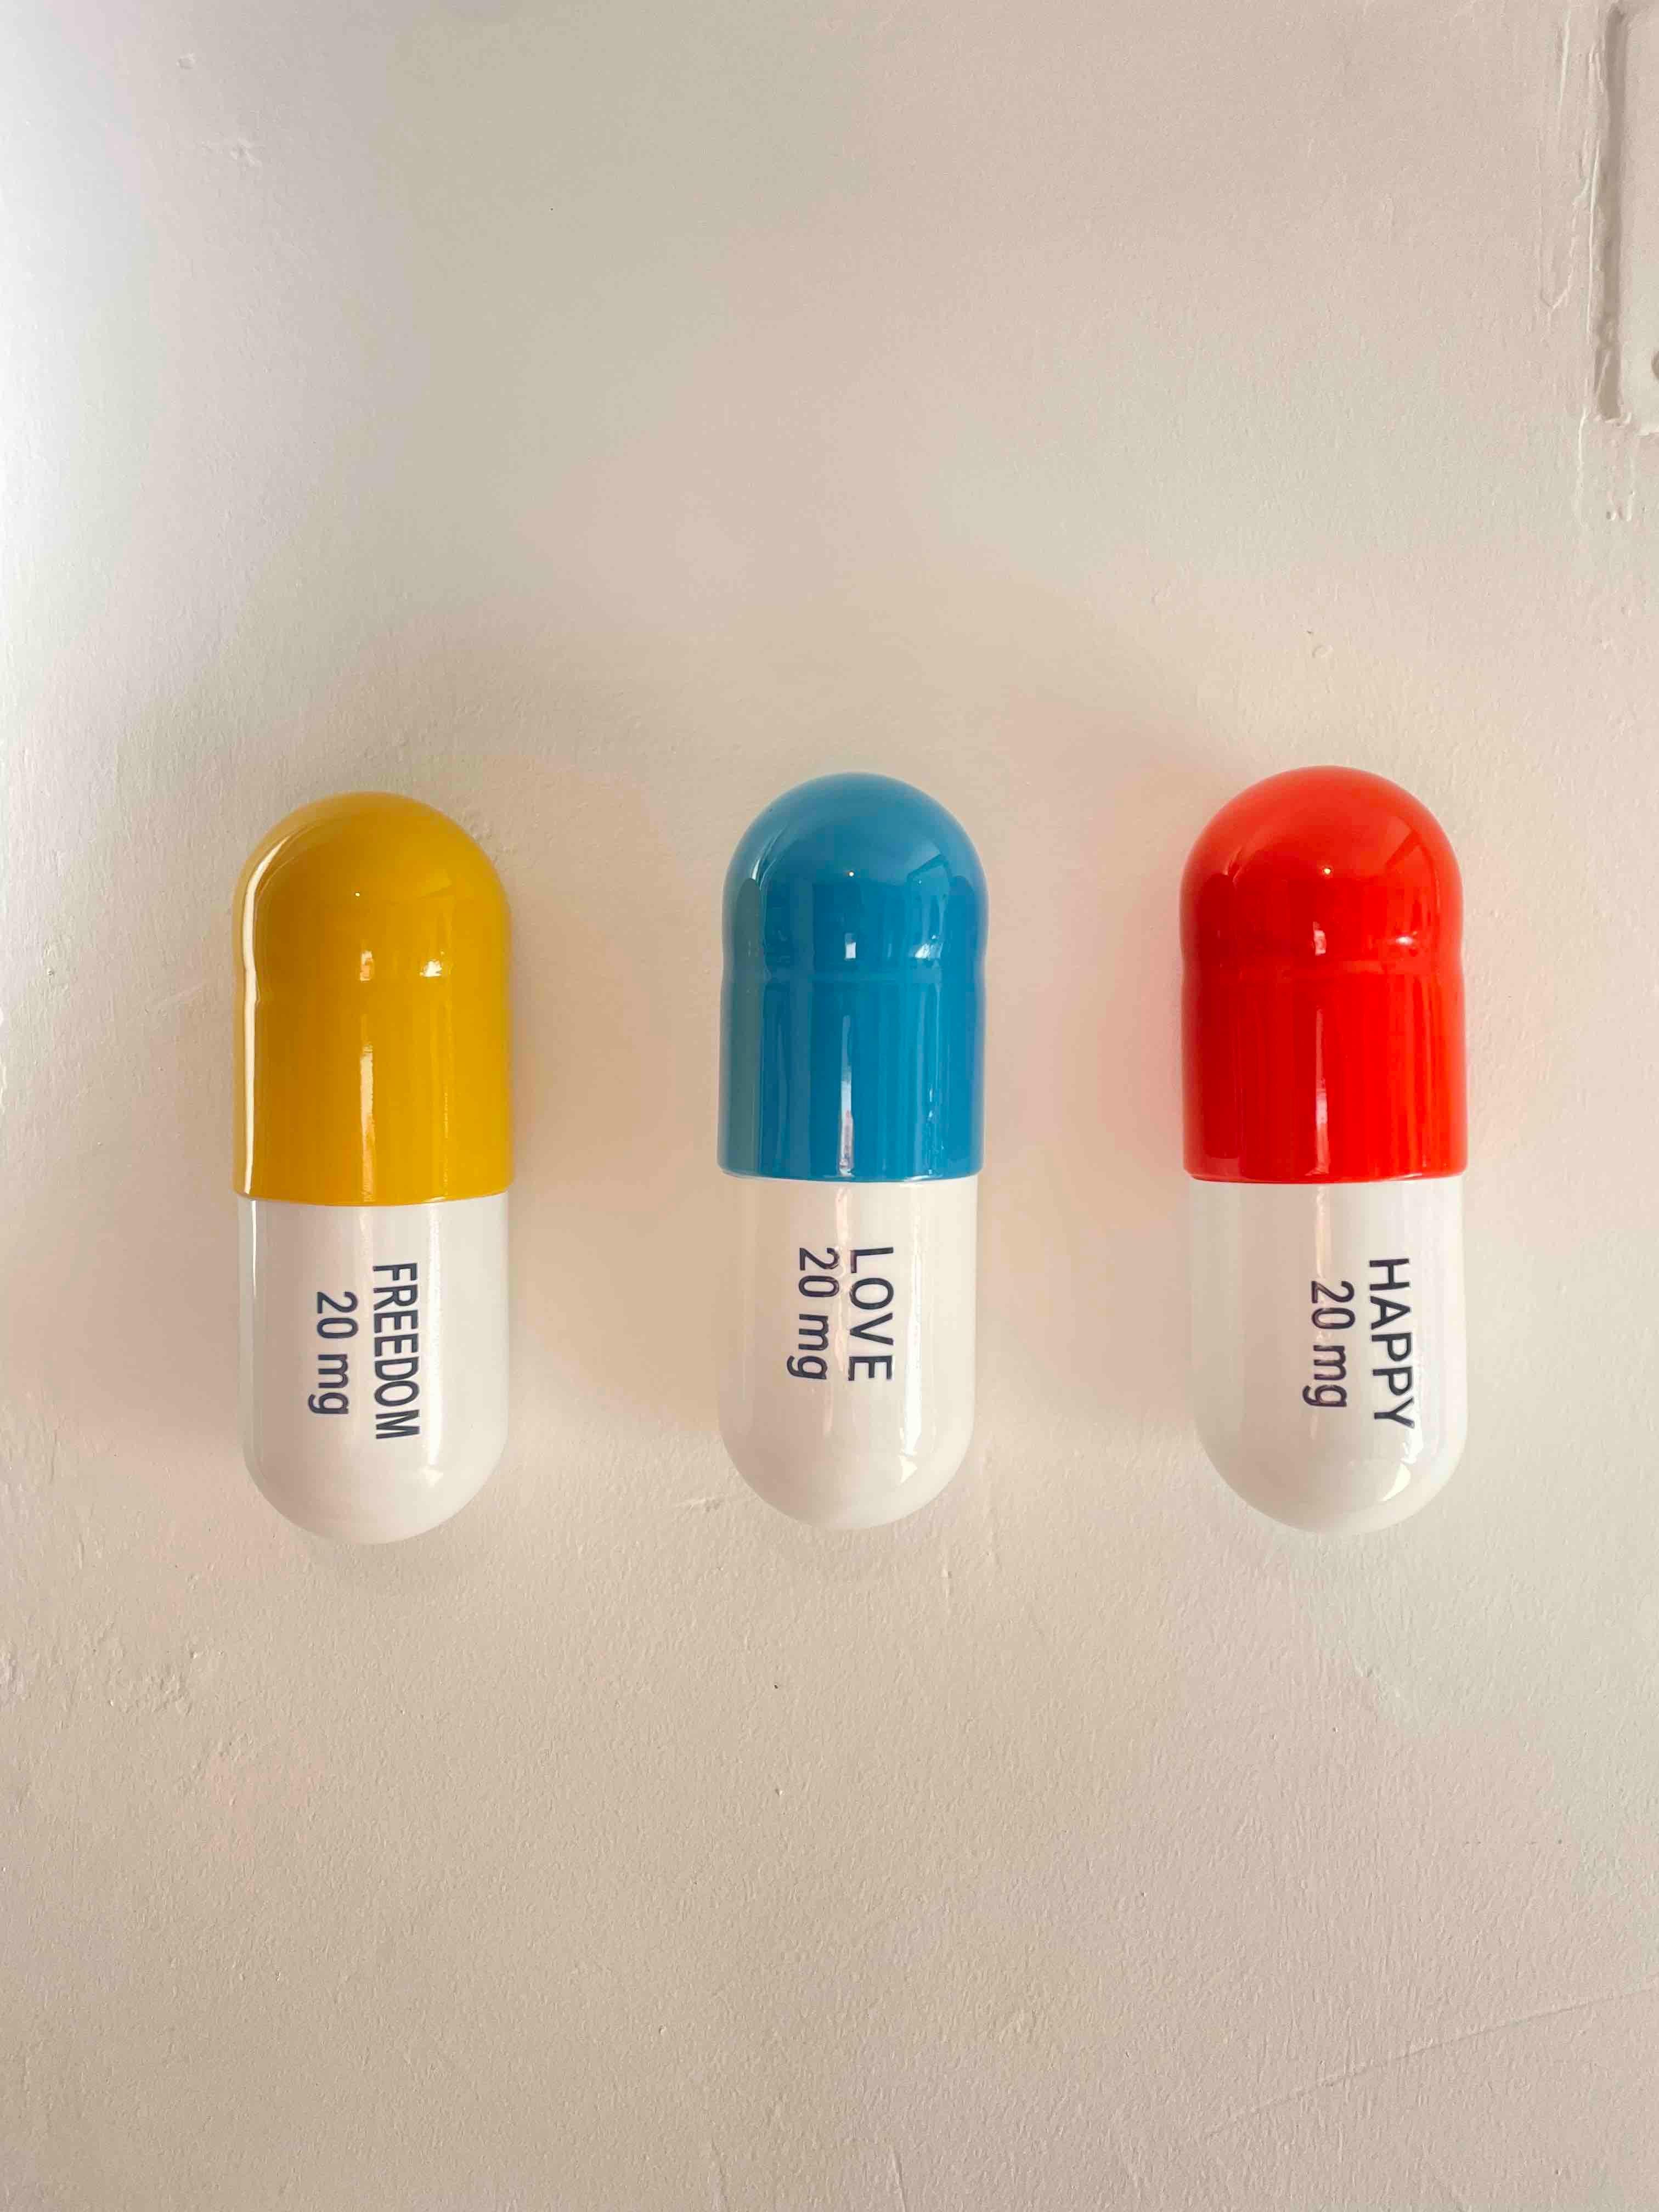 Tal Nehoray Figurative Sculpture - 20 MG Happy pill Combo (blue, yellow and orange) - figurative sculpture